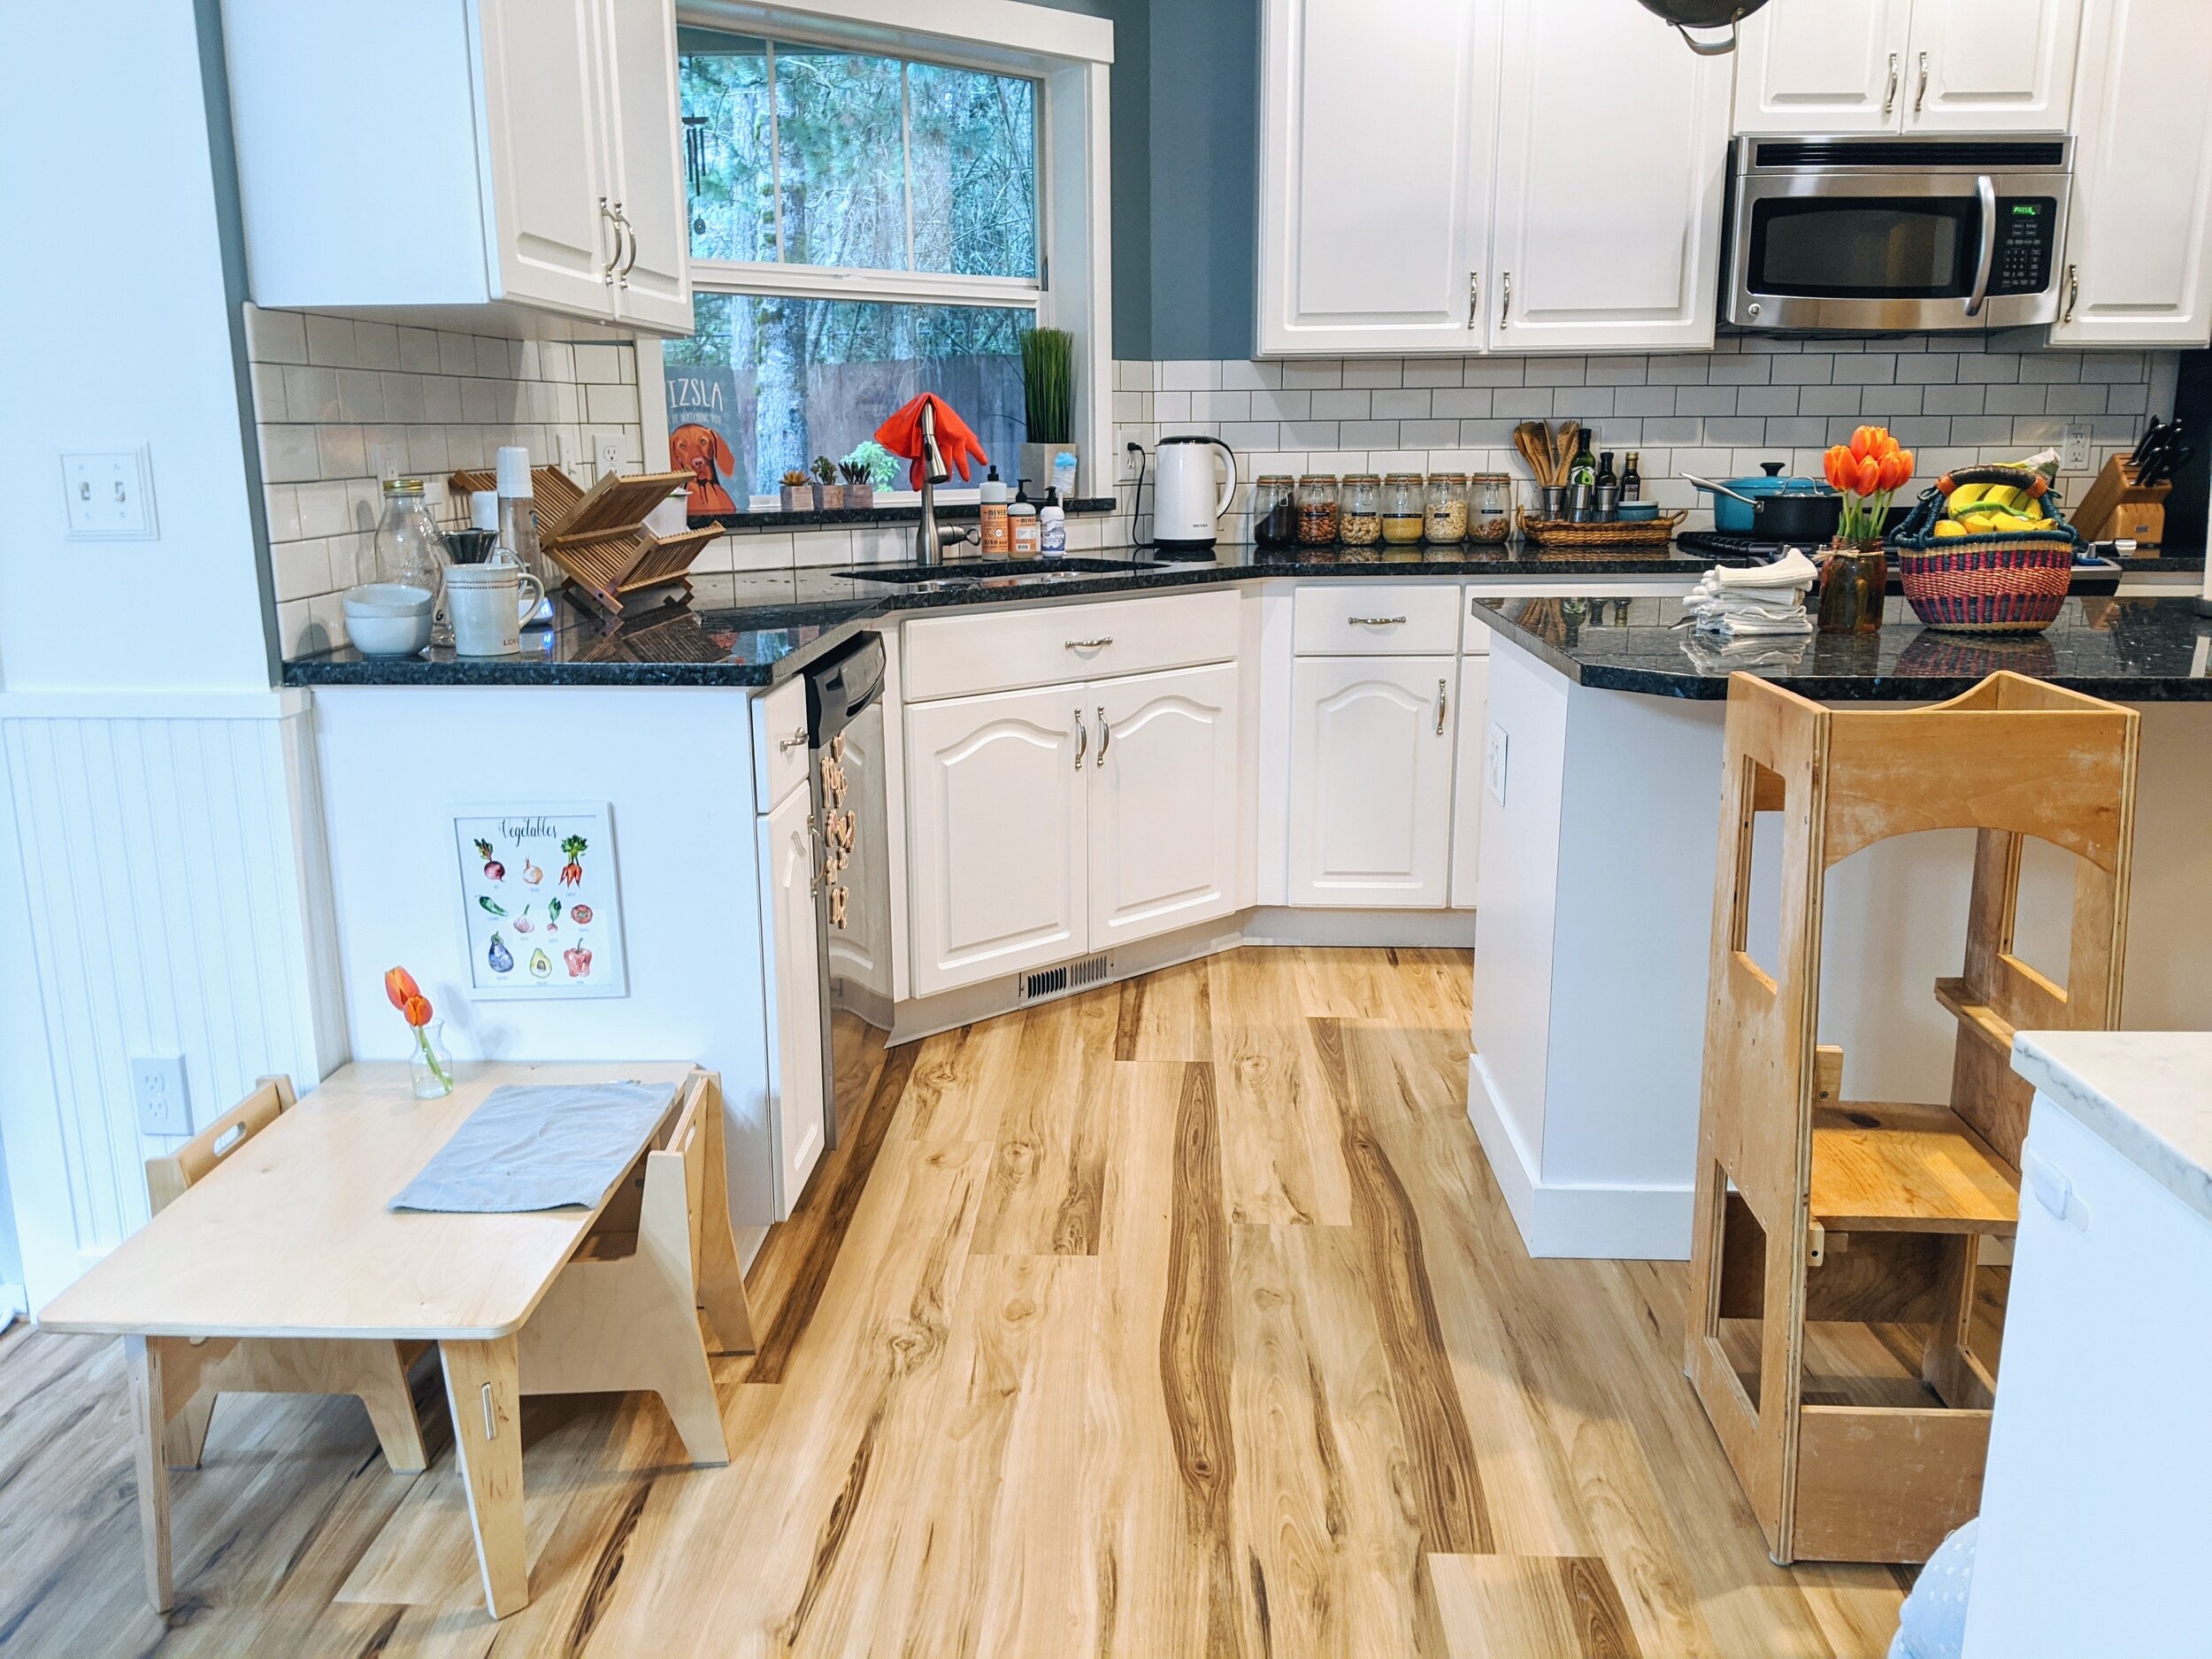 Our Child Sized Kitchen: A history – Our Montessori Life